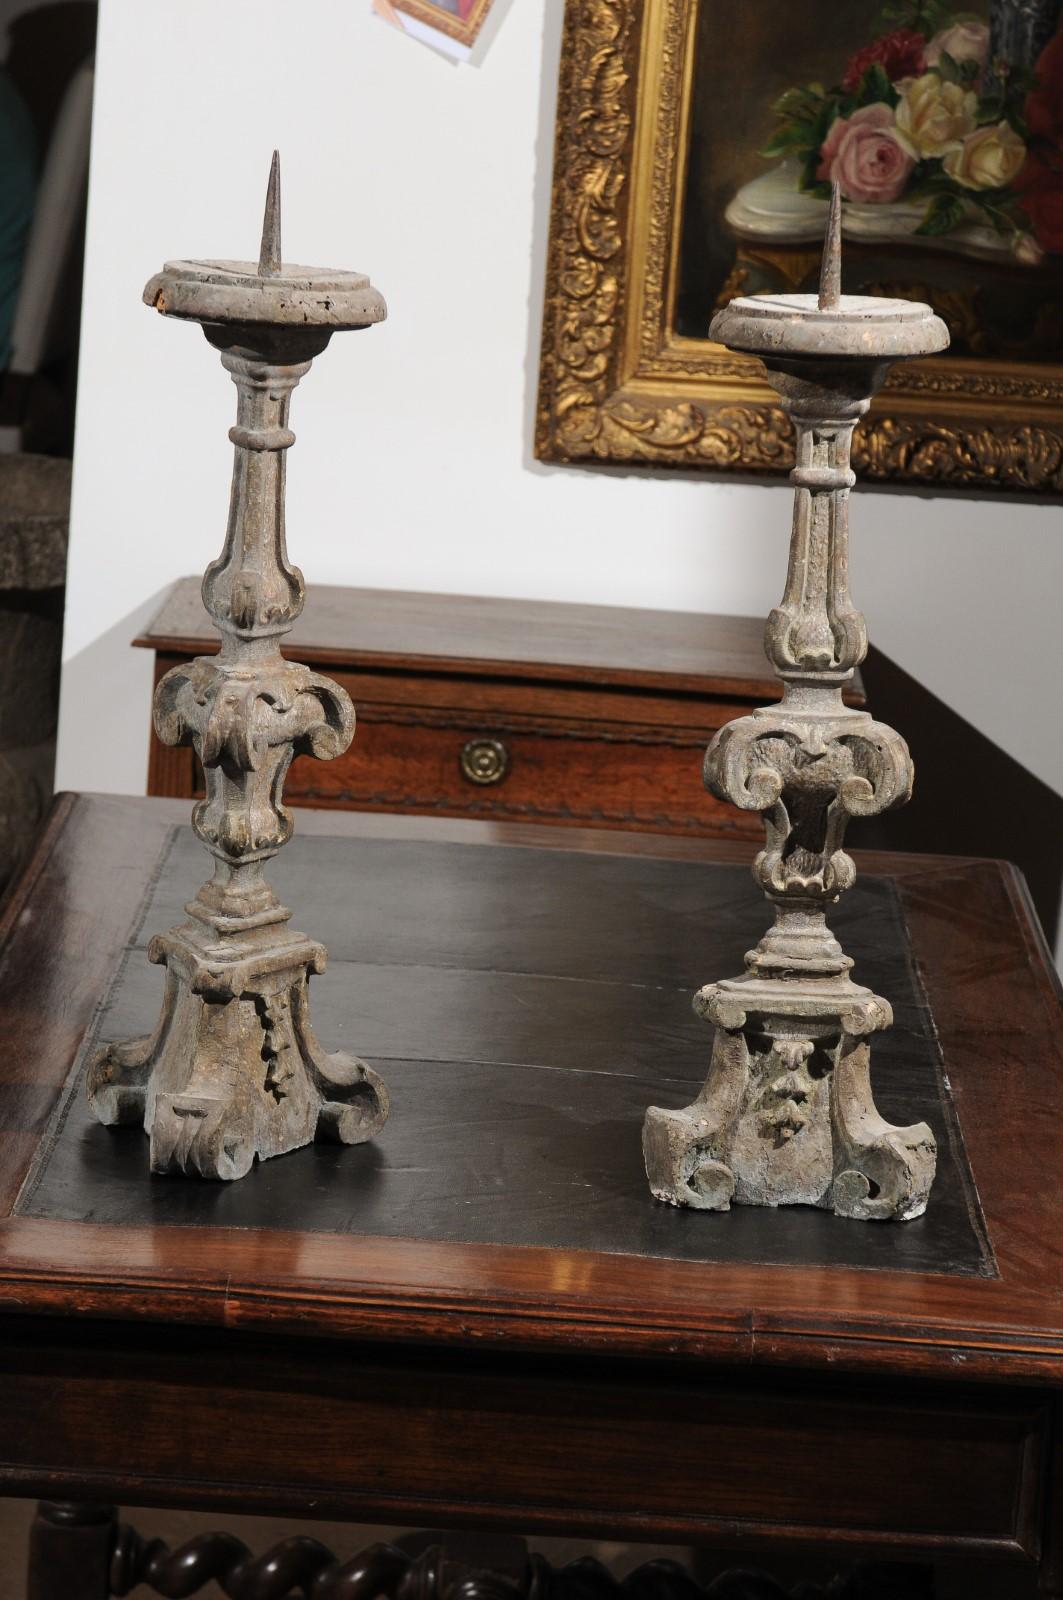 A pair of French 18th century painted and carved wooden altar sticks with volutes and delicate foliage. Born in France during the later years of King Louis XV's reign, each of this pair of altar sticks is painted in a light grey color complimenting